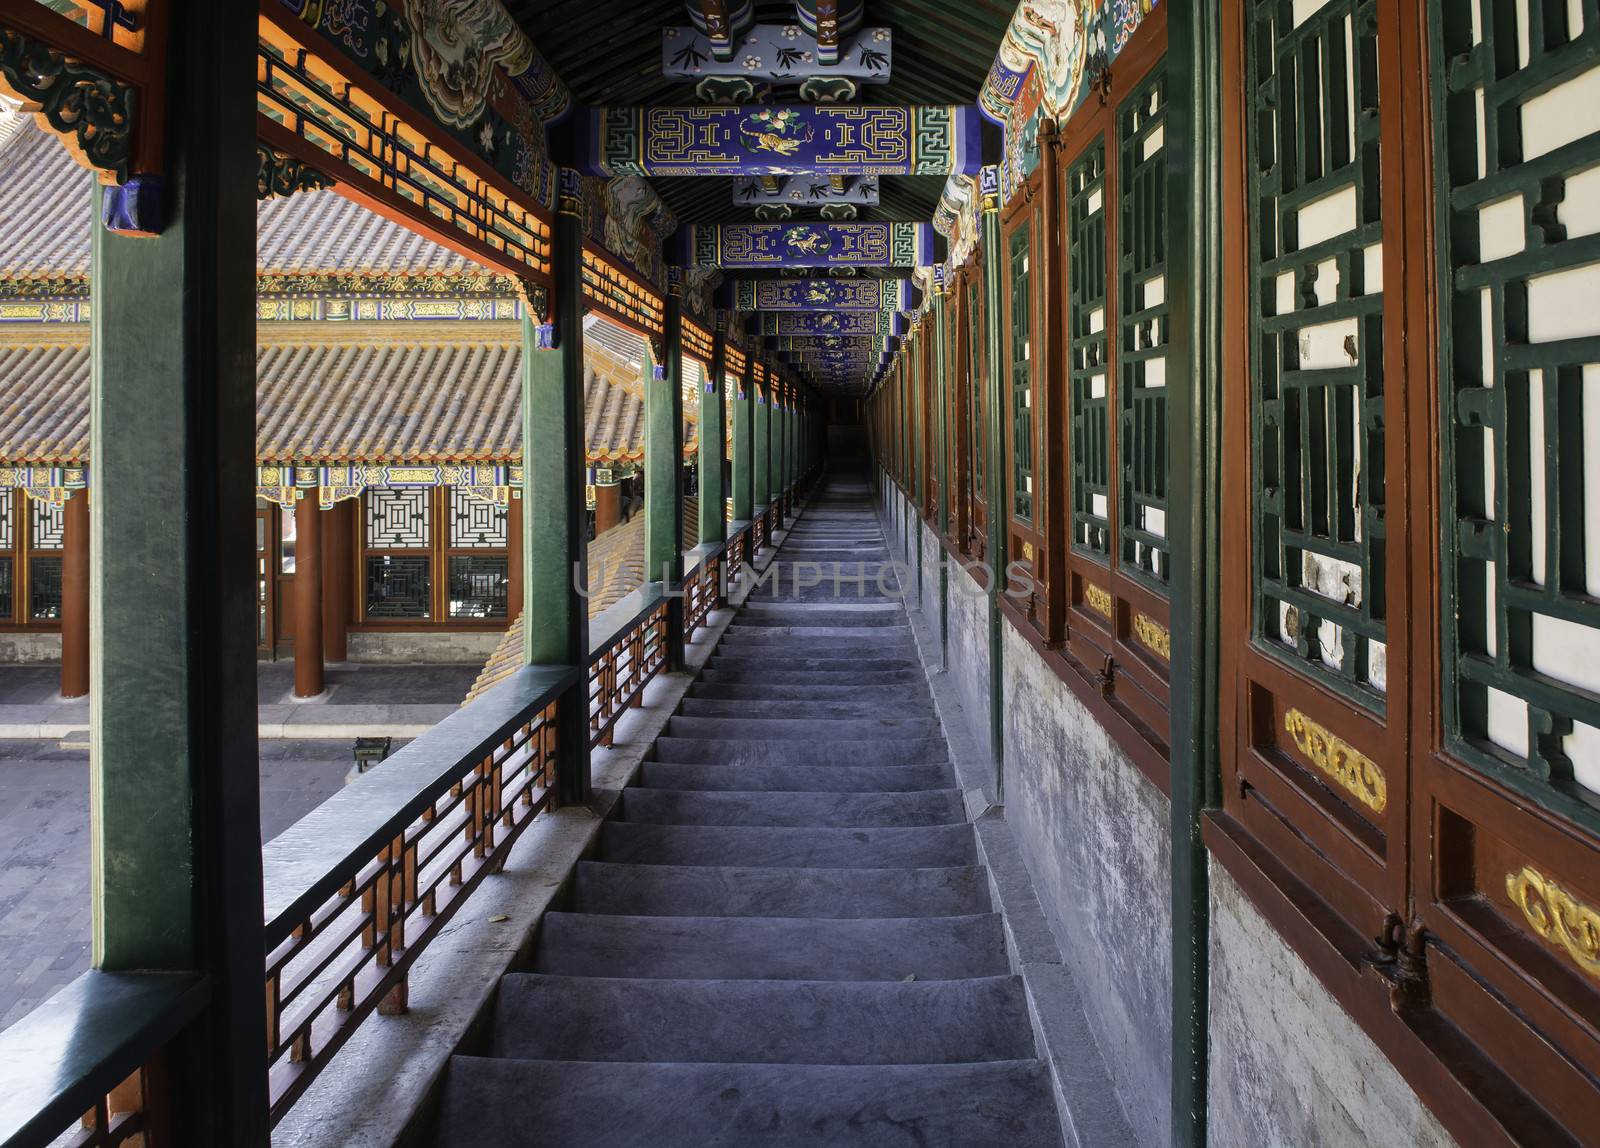 The Gallery of the Tower of Buddhist Incense in Summer Palace of Beijing, China.